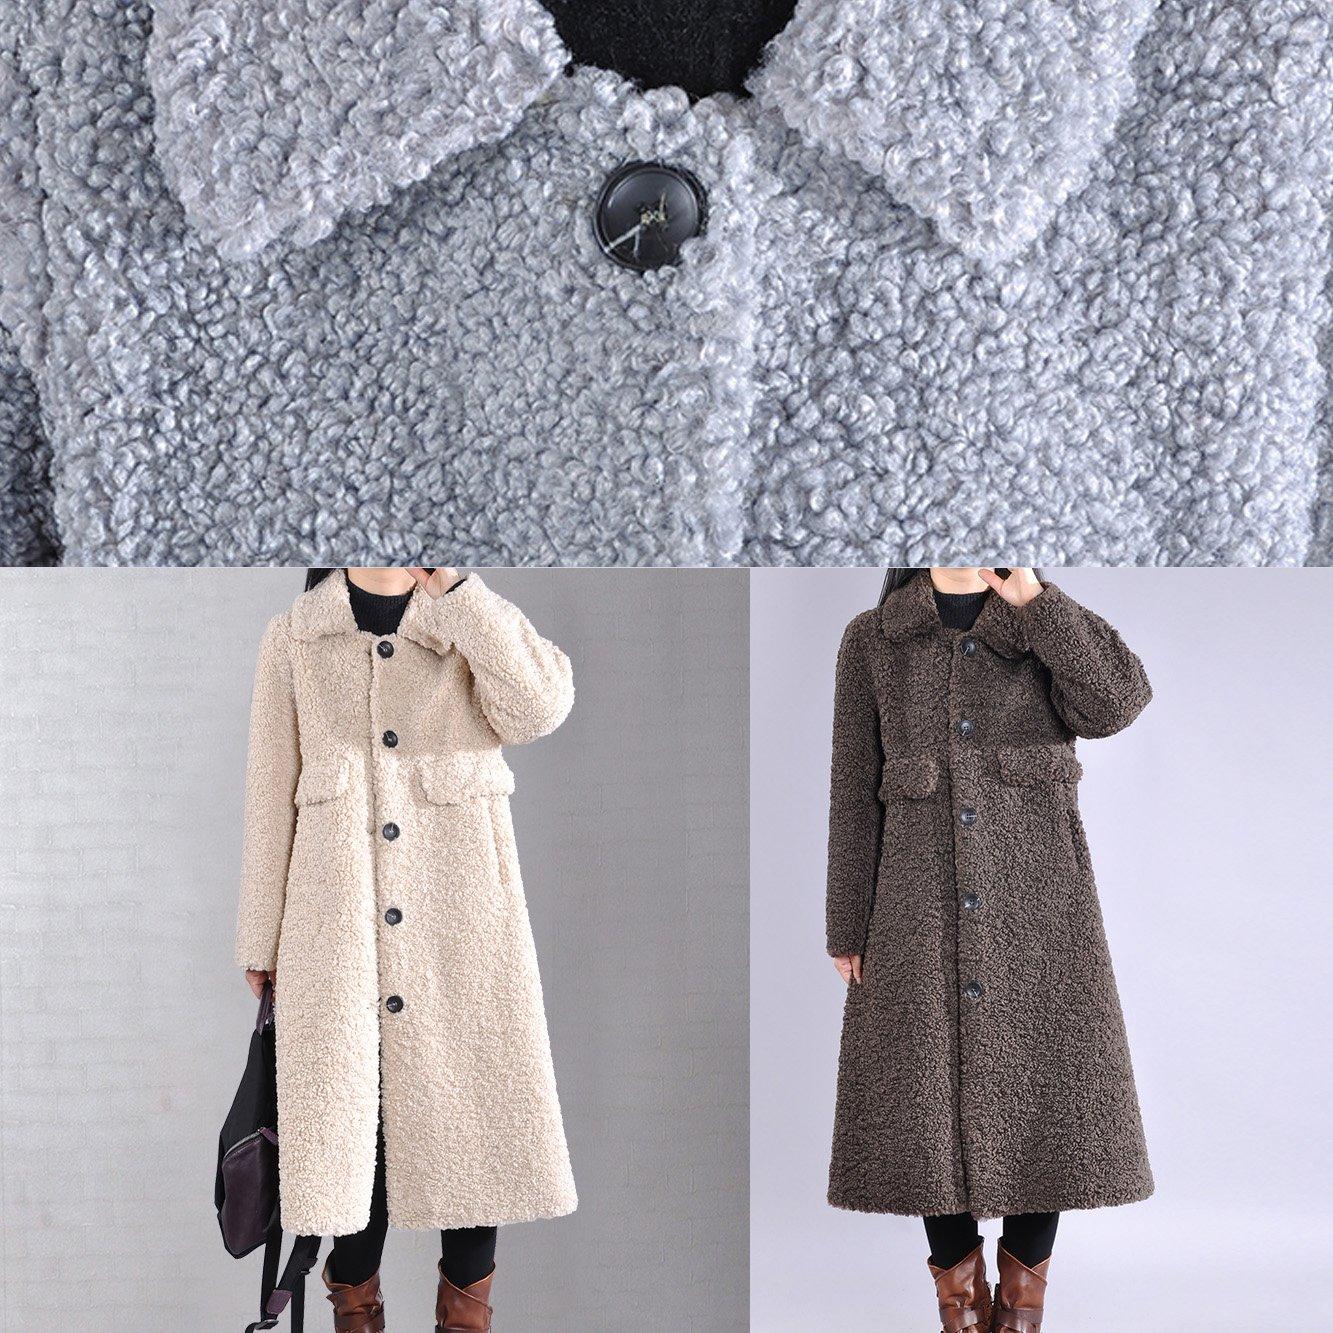 Fine white woolen outwear Loose fitting lapel Button trench coat - Omychic